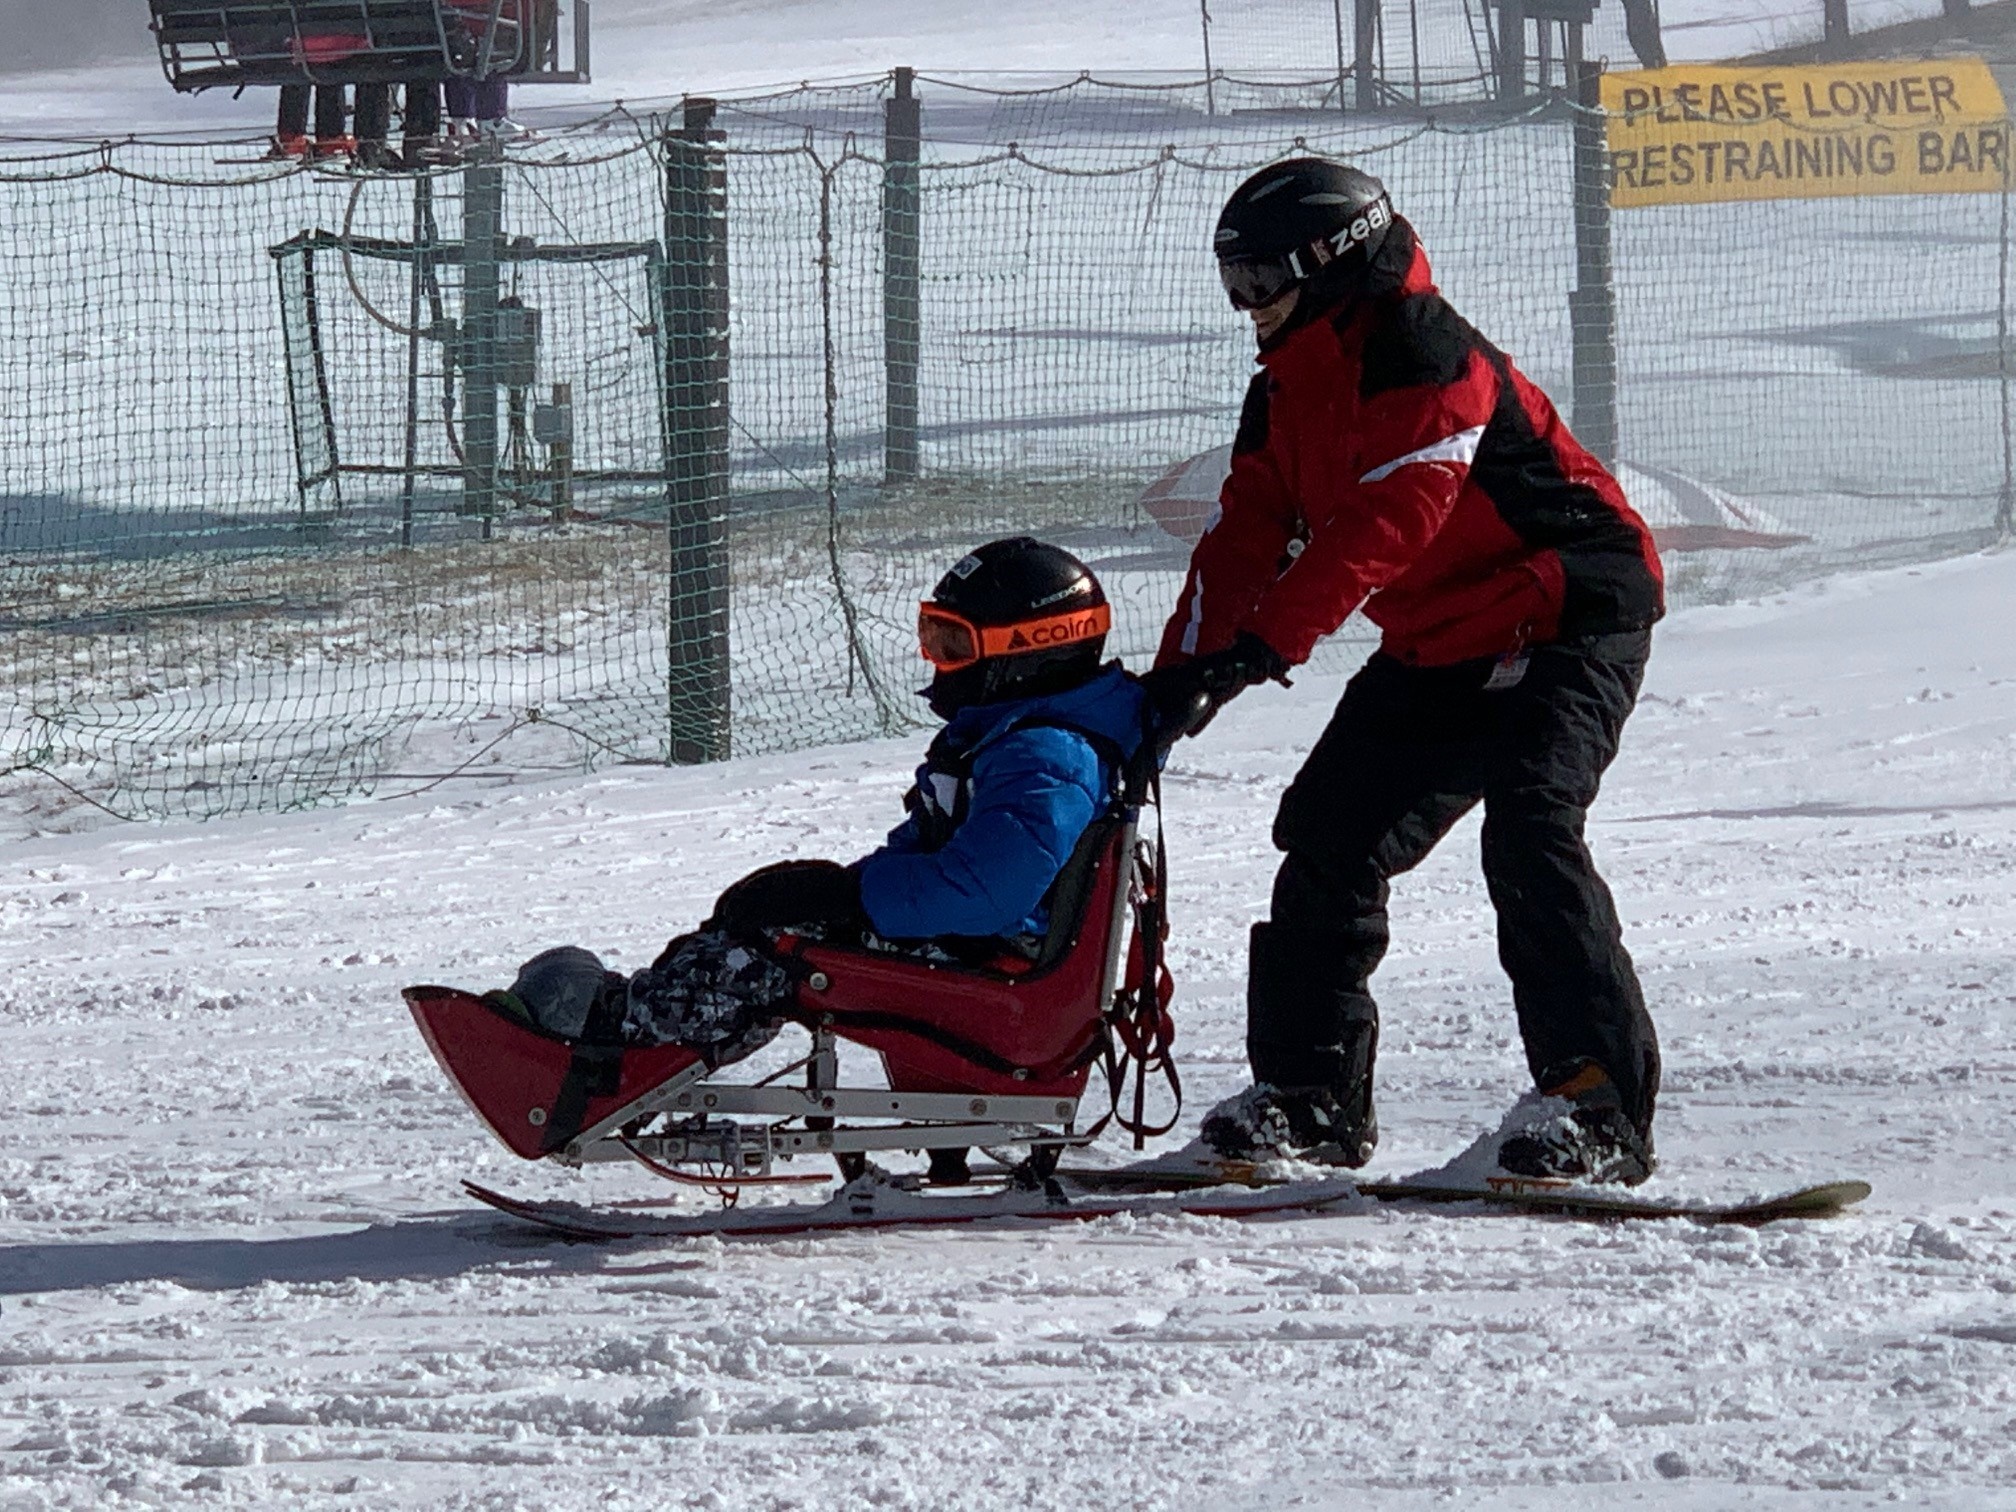 An instructor pushes an adaptive skier in a wheelchair down a slope at Roundtop Mountain Resort. Both are wearing ski jackets, ski pants and helmets. Two people stand in the background, and one person lies on the ground.